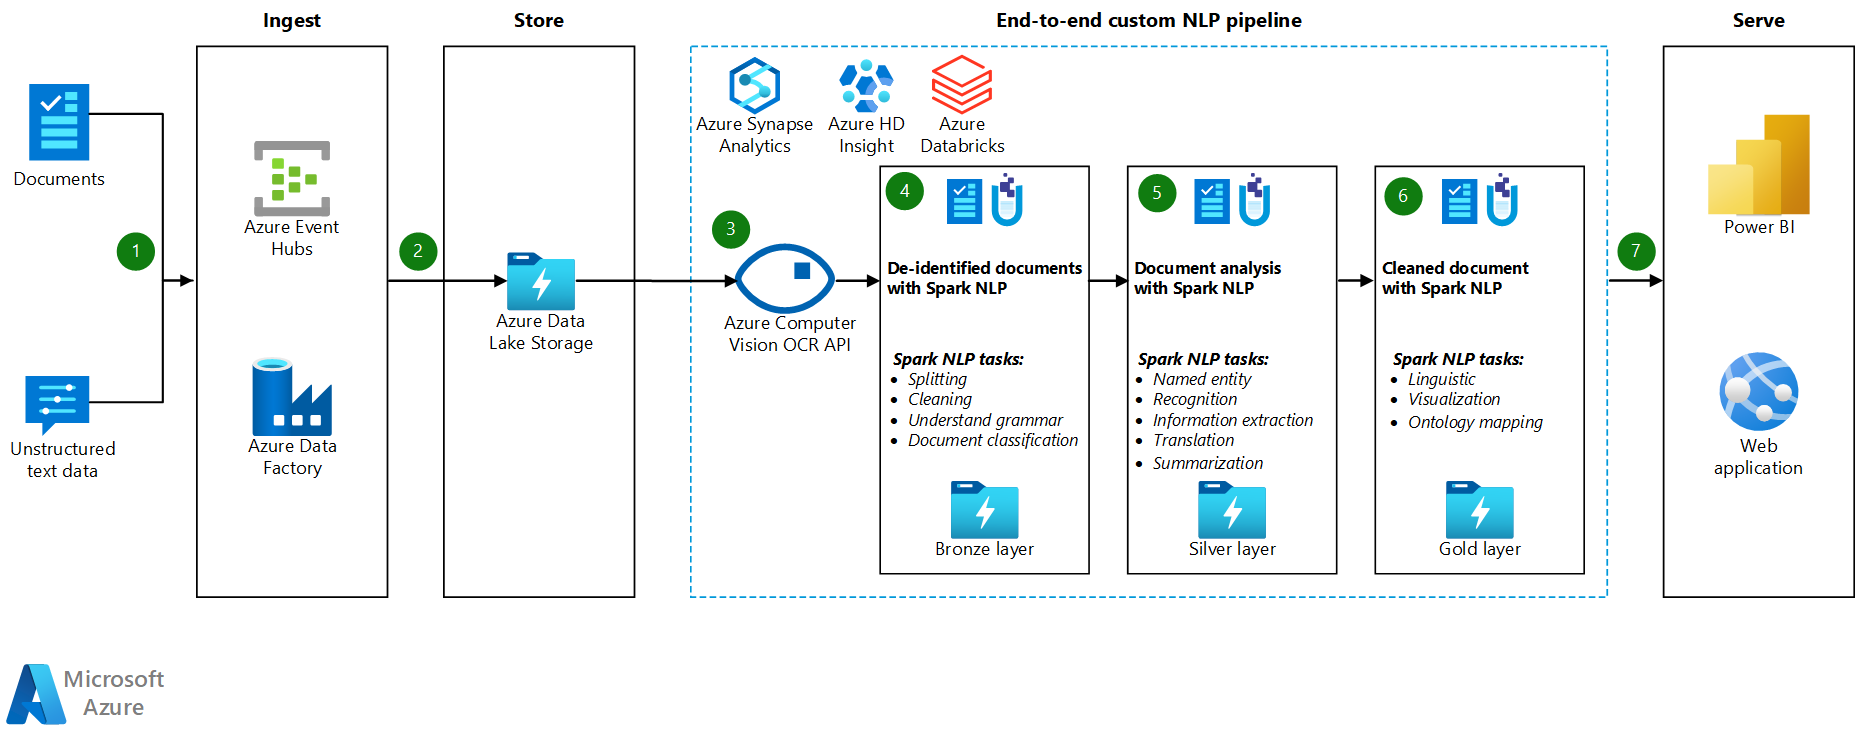 Large-scale custom natural language processing - Azure Architecture Center  | Microsoft Learn